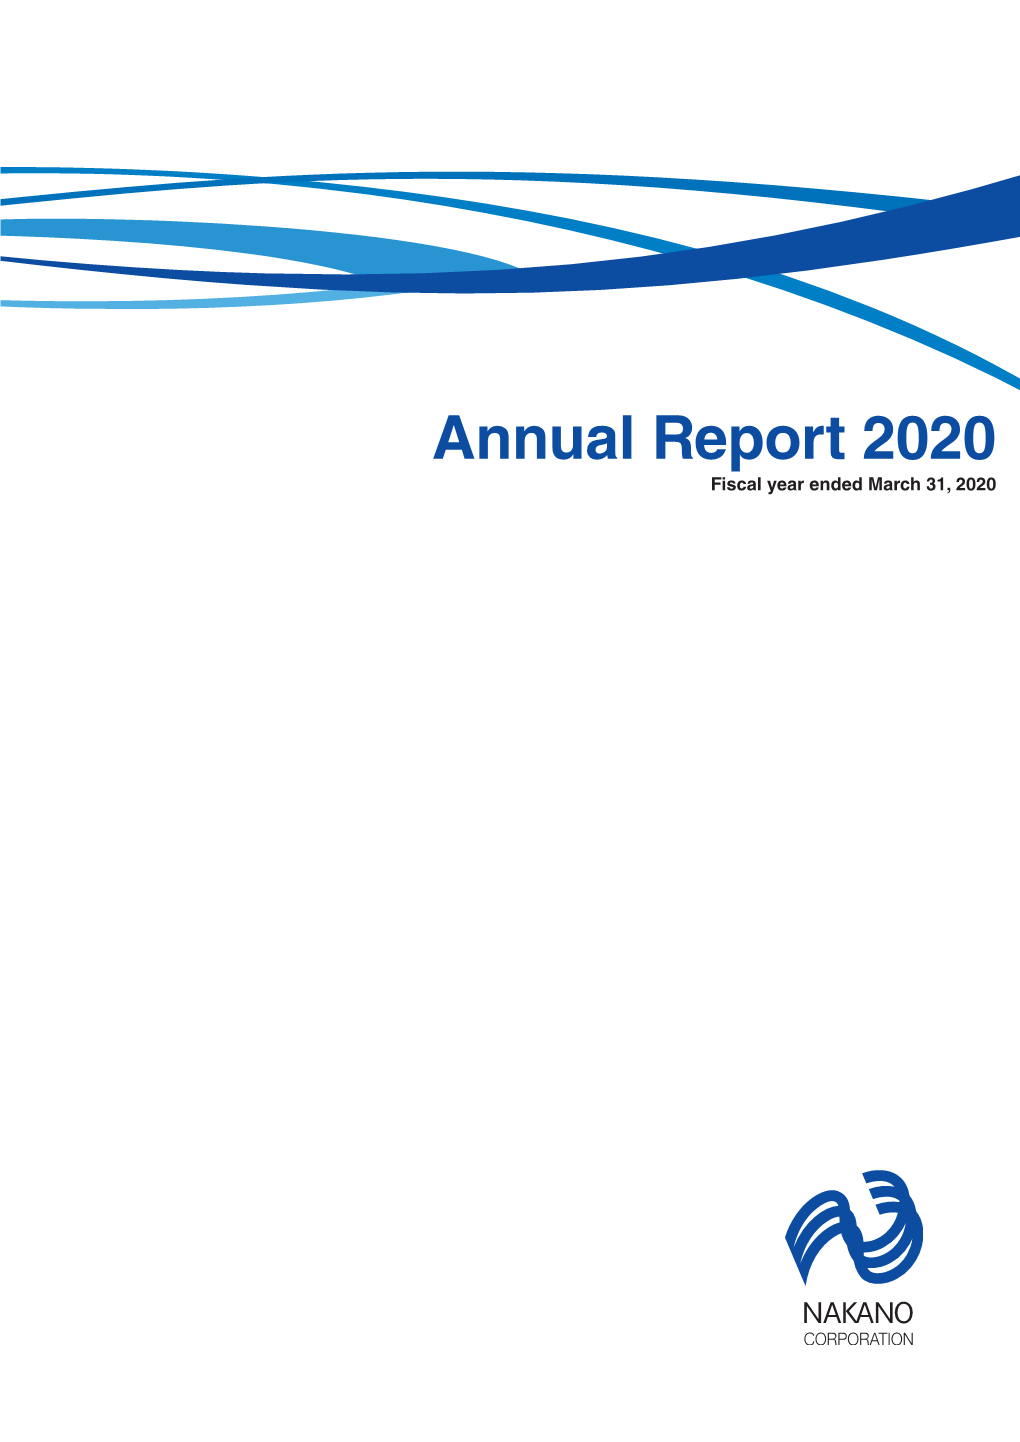 Annual Report 2020 Fiscal Year Ended March 31, 2020